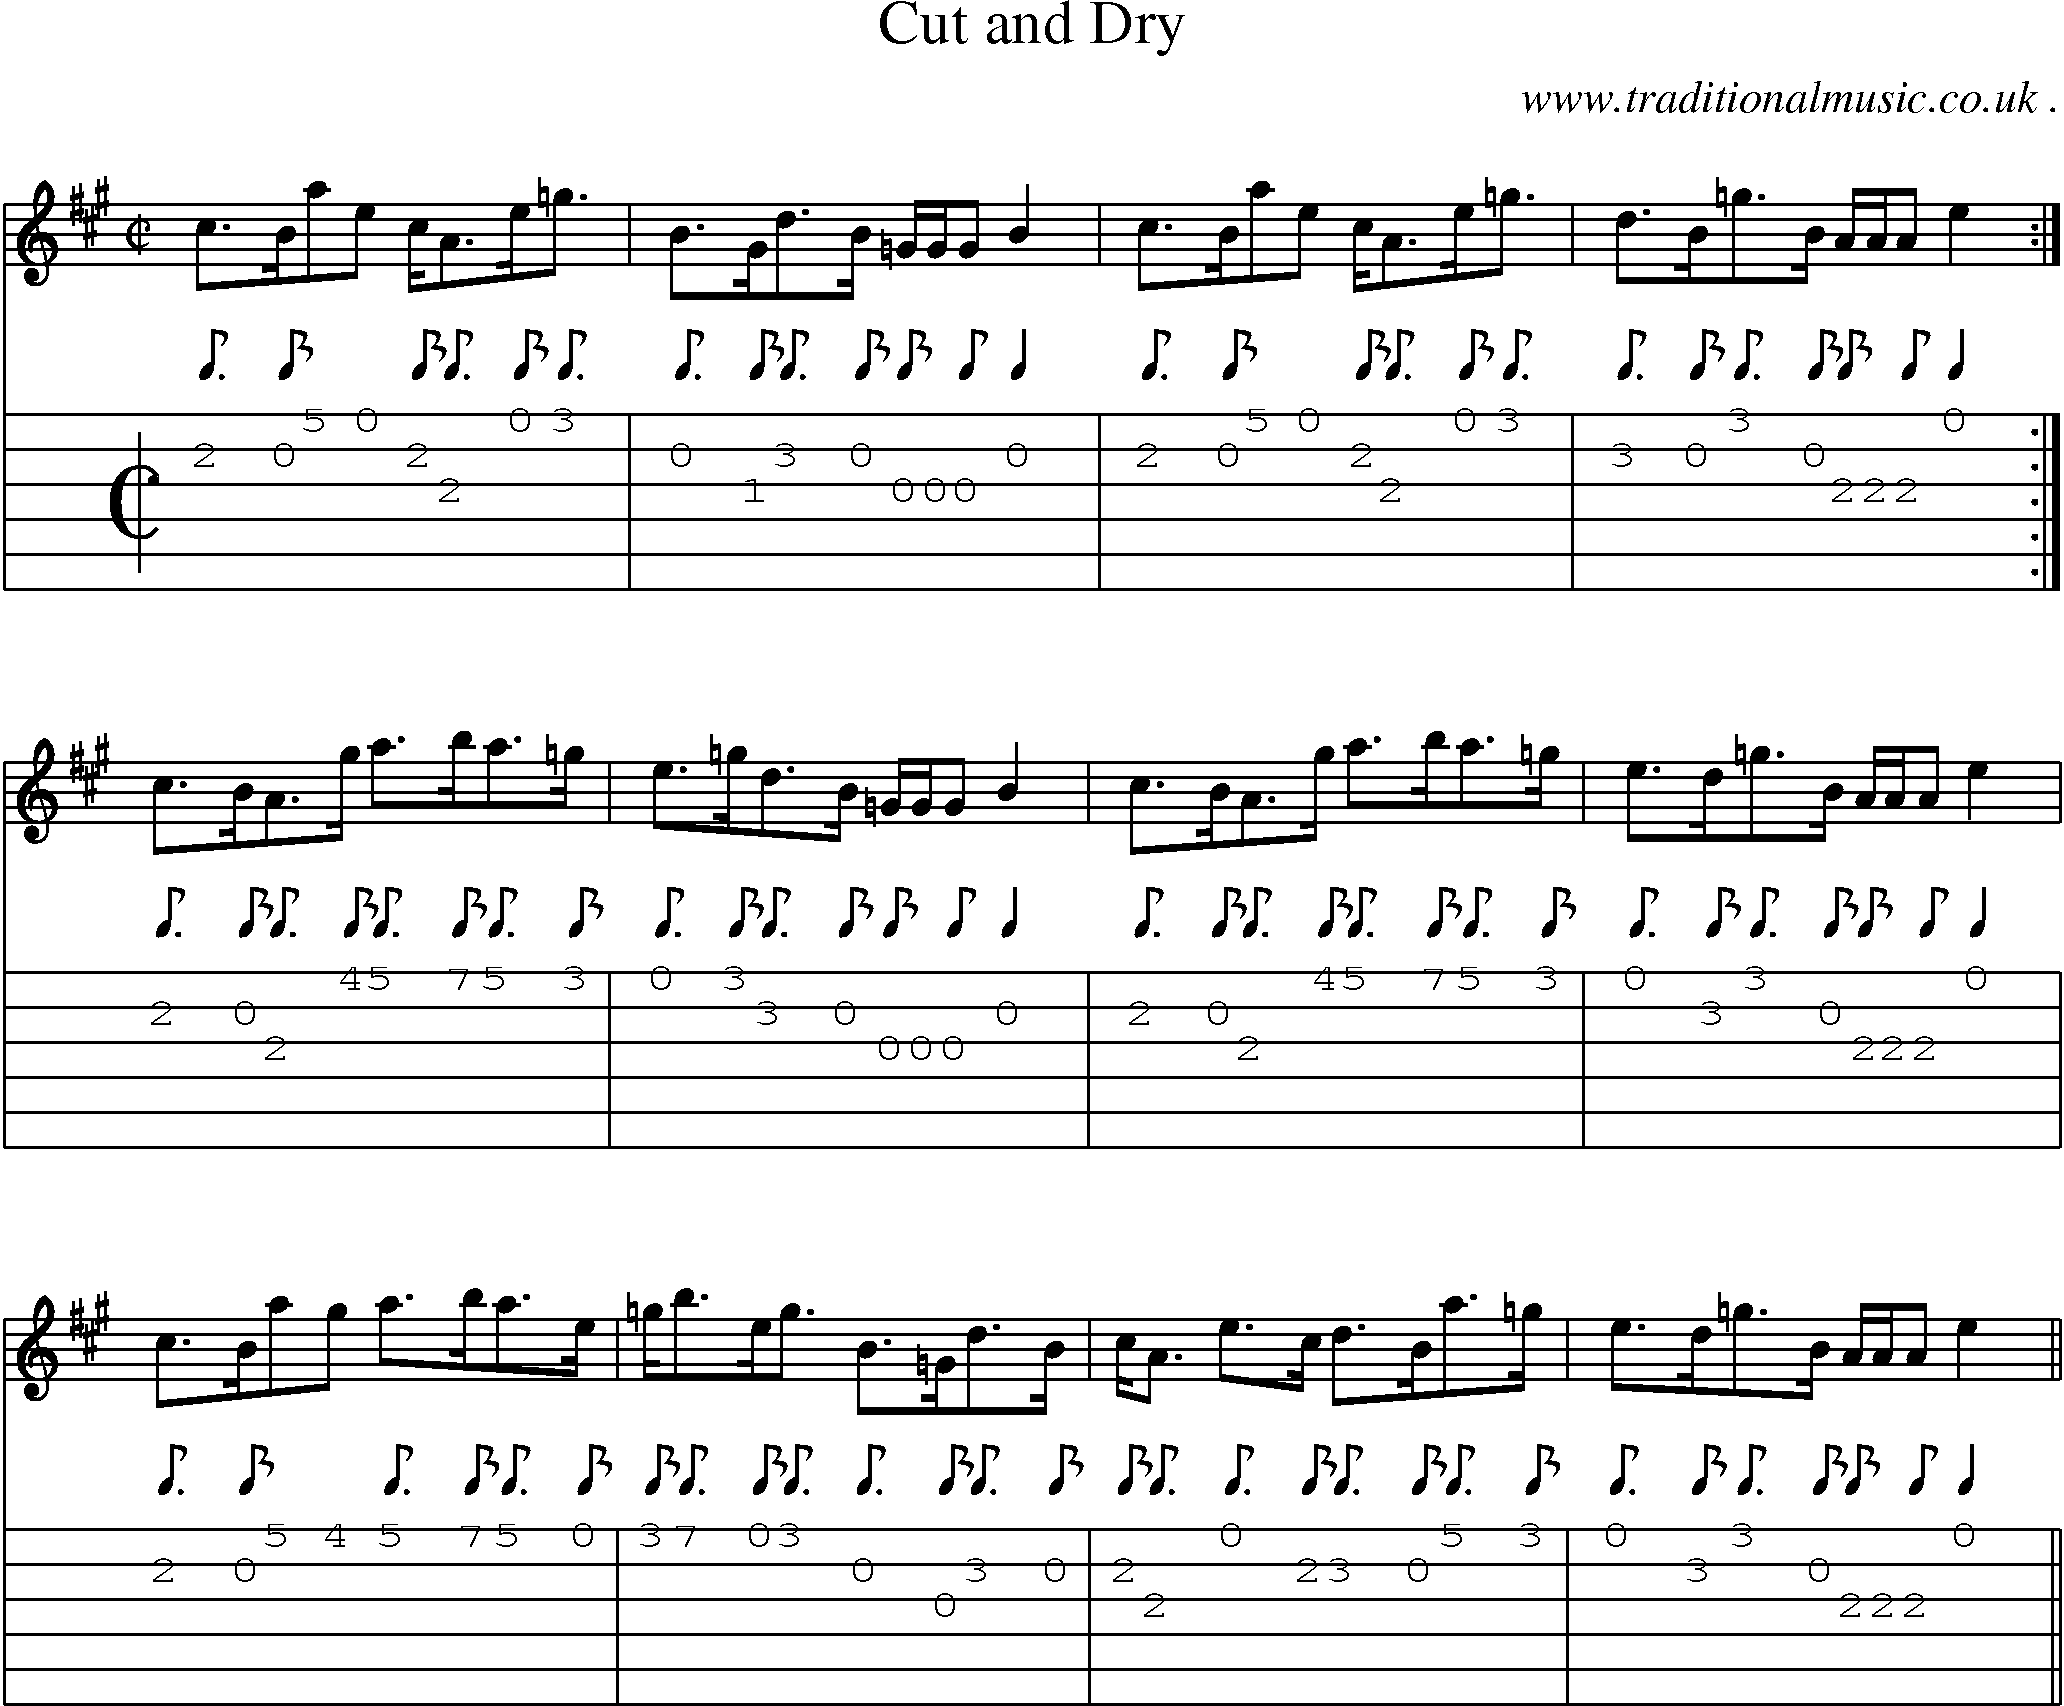 Sheet-music  score, Chords and Guitar Tabs for Cut And Dry